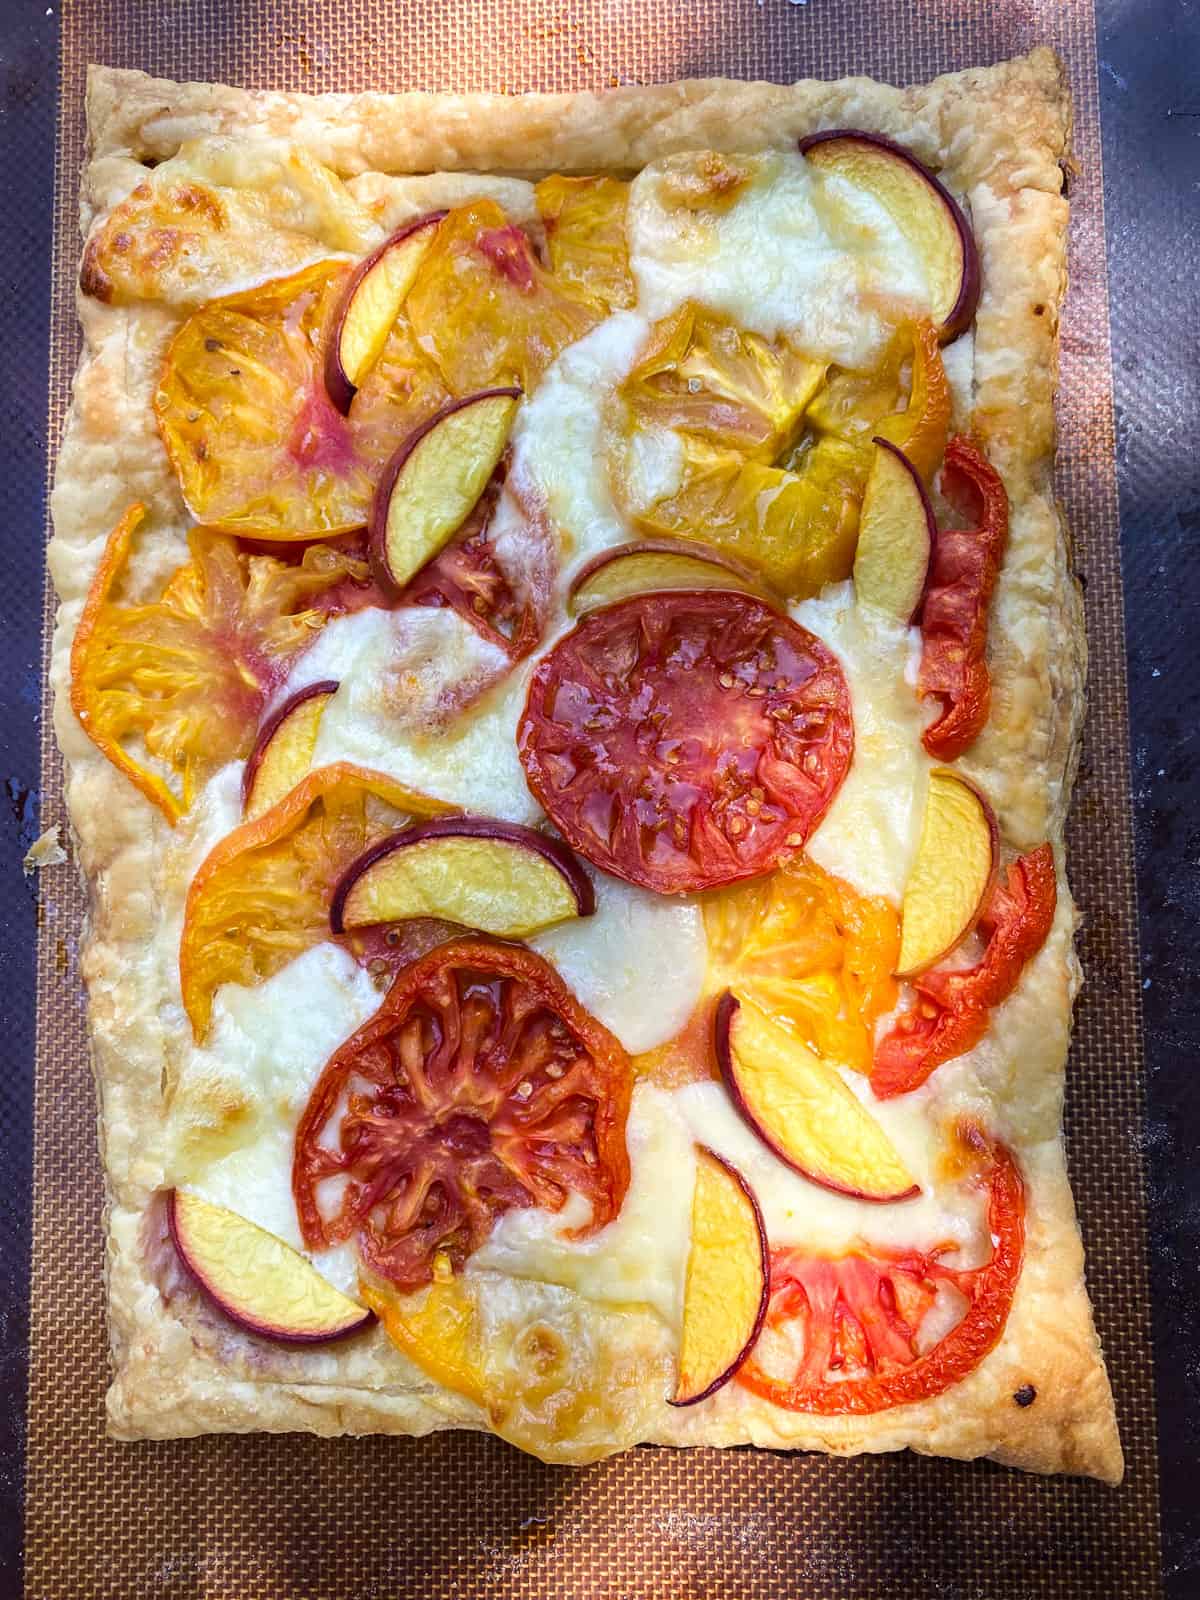 Bake the caprese tart until the puff pastry is golden brown and cheese has melted.